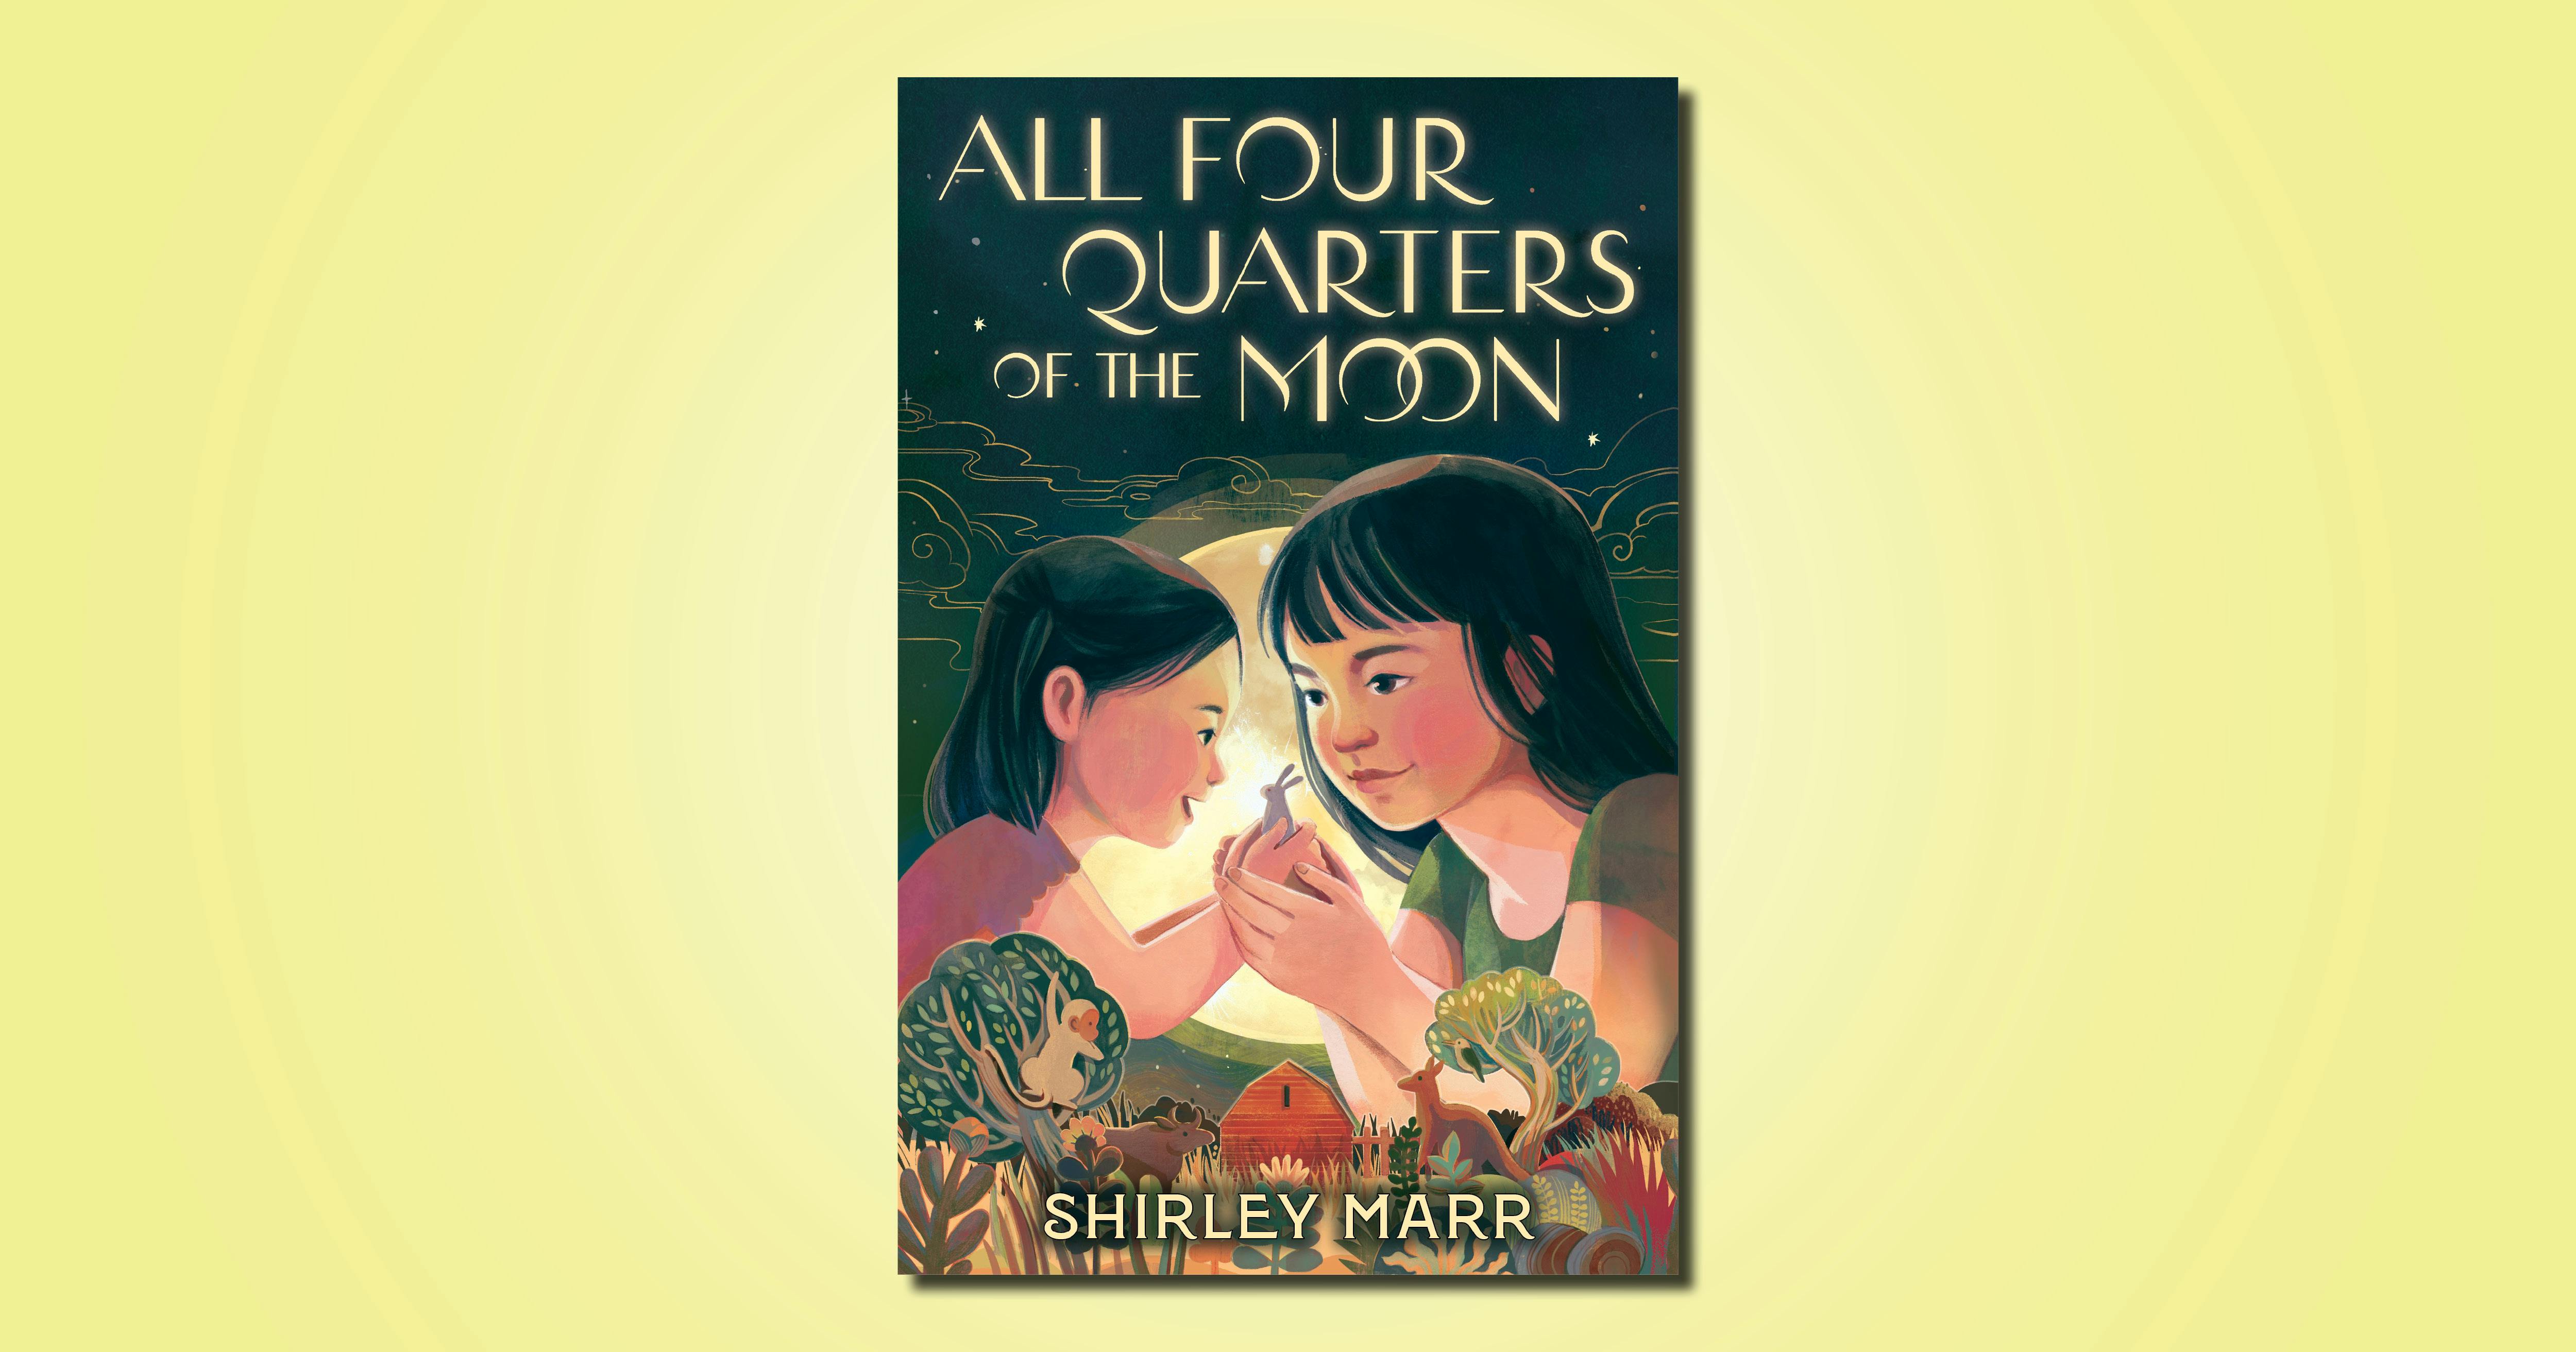 All Four Quarters of the Moon book club questions